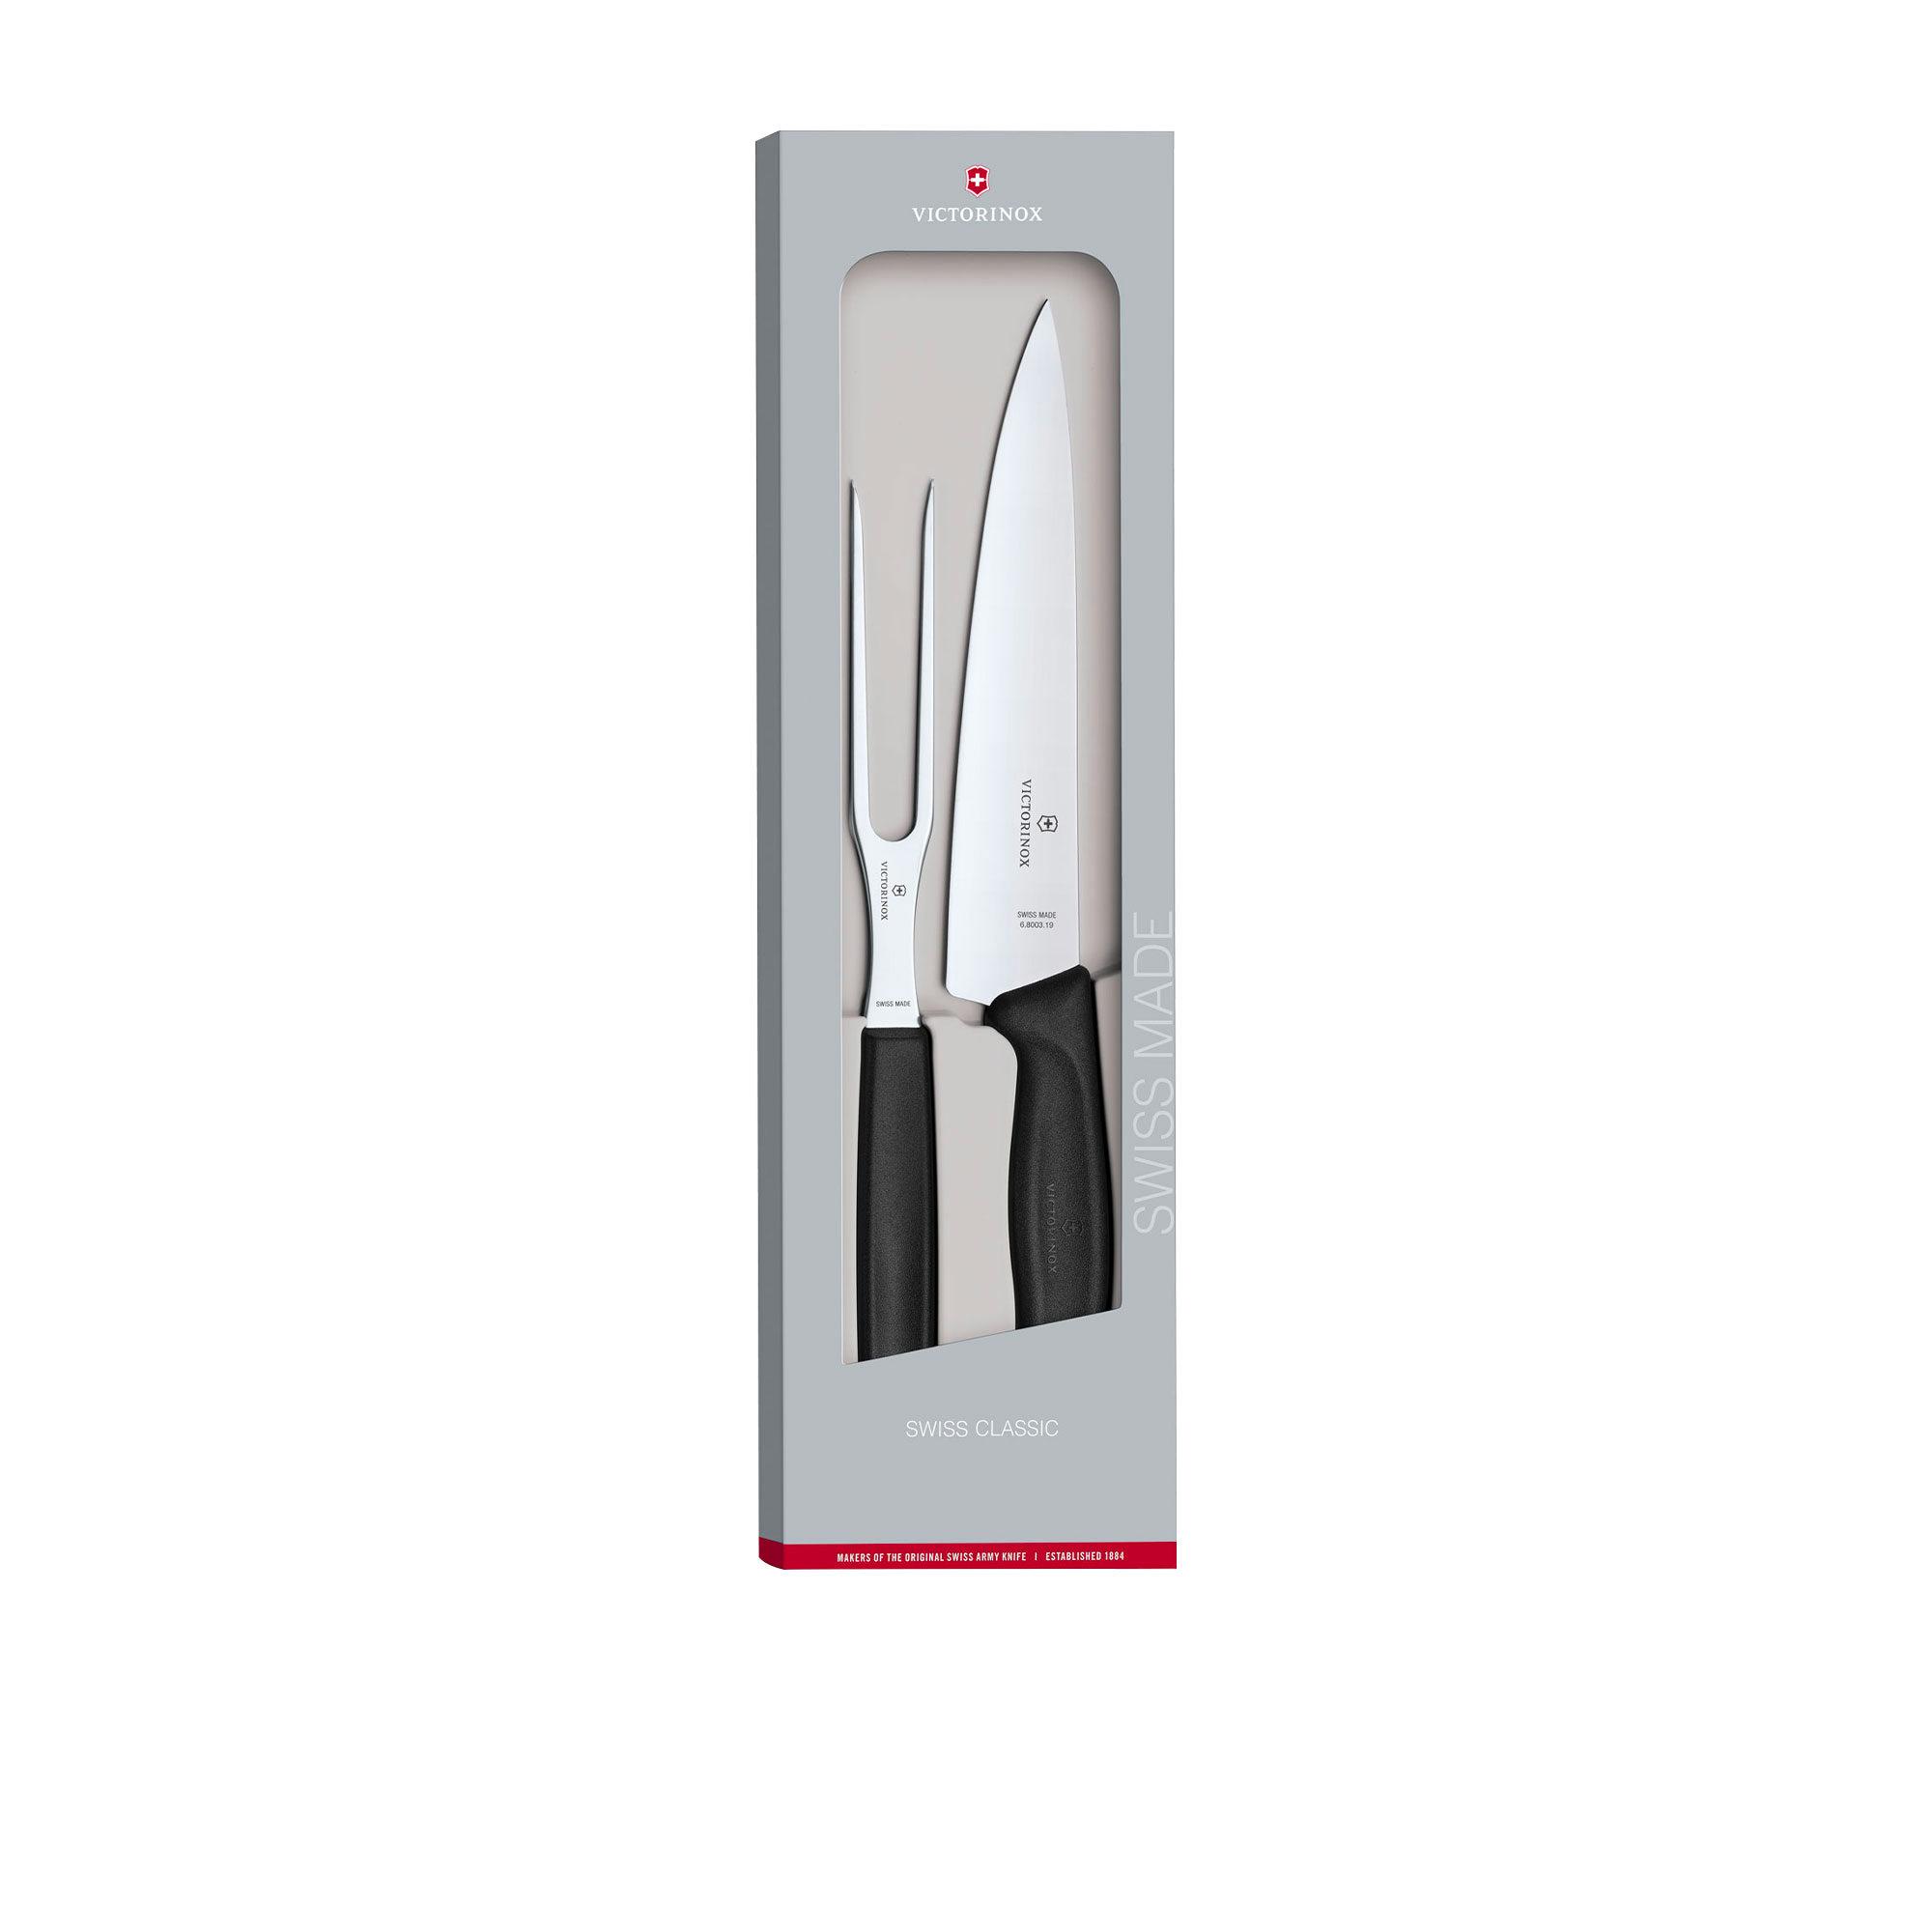 Victorinox Classic 2pc Carving Knife Set Image 2